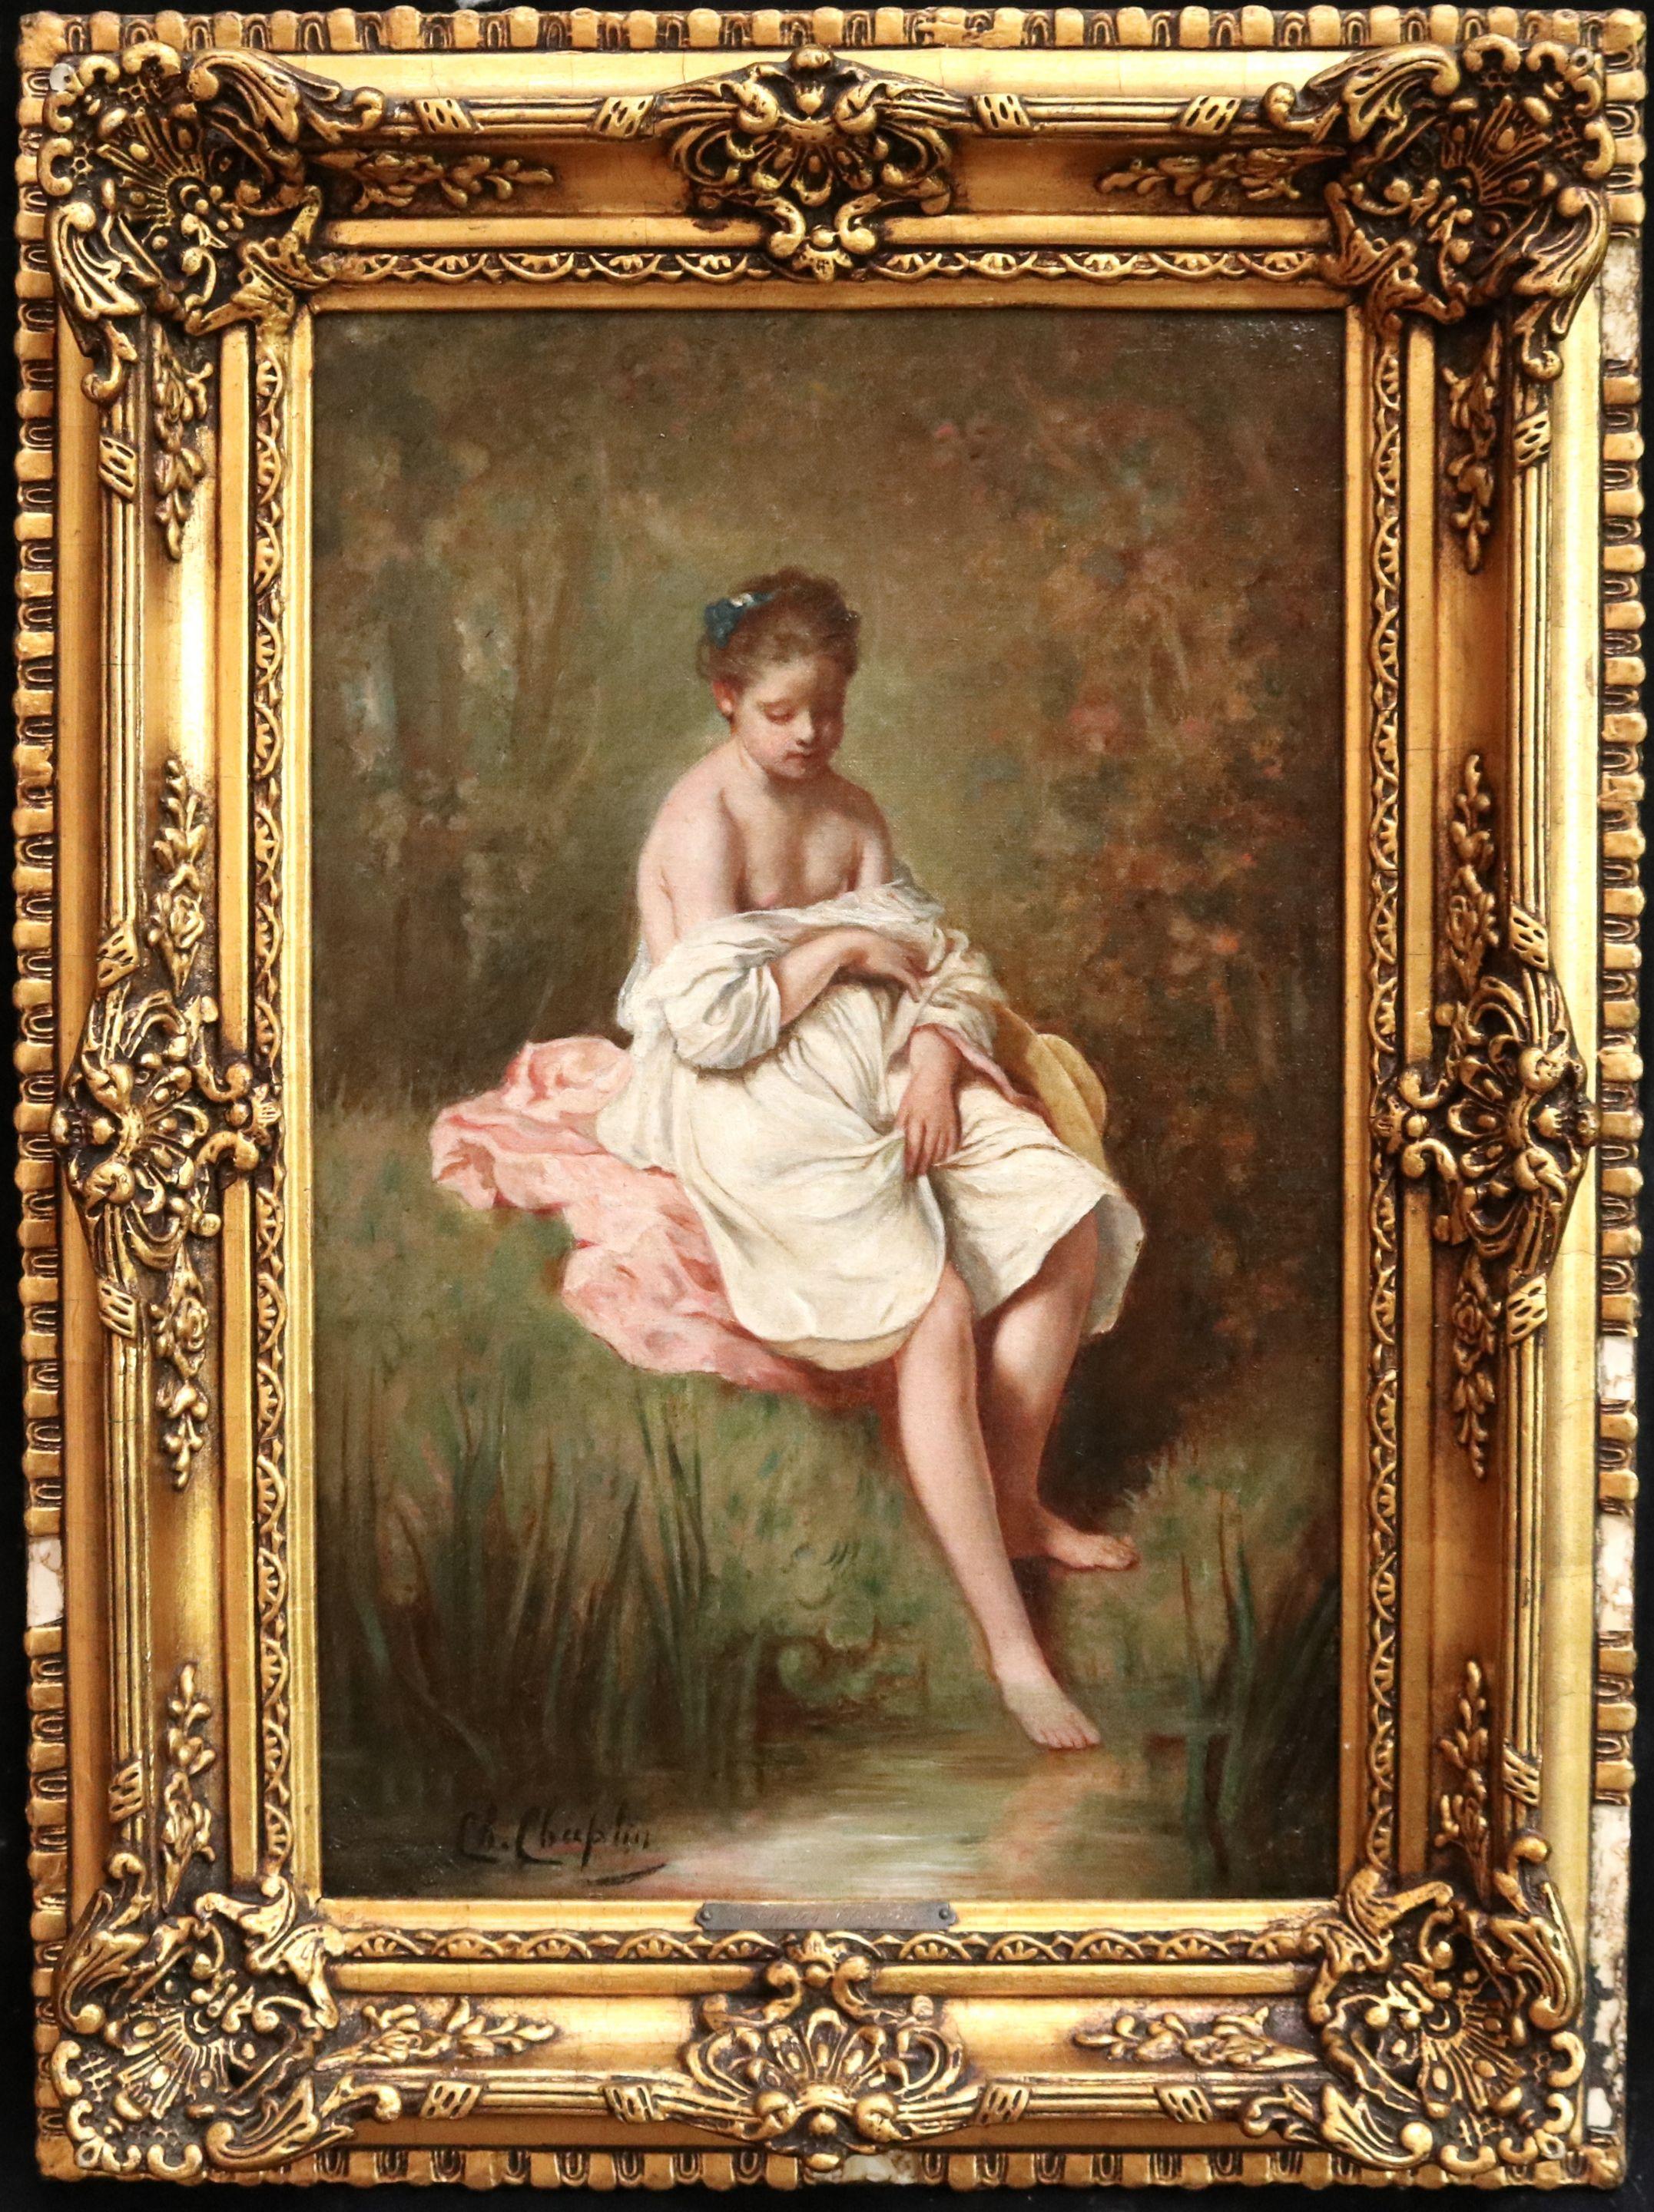 Baigneuse - 19th Century Oil, Nude Figure in River Landscape by Charles Chaplin - Painting by Charles Chaplin 